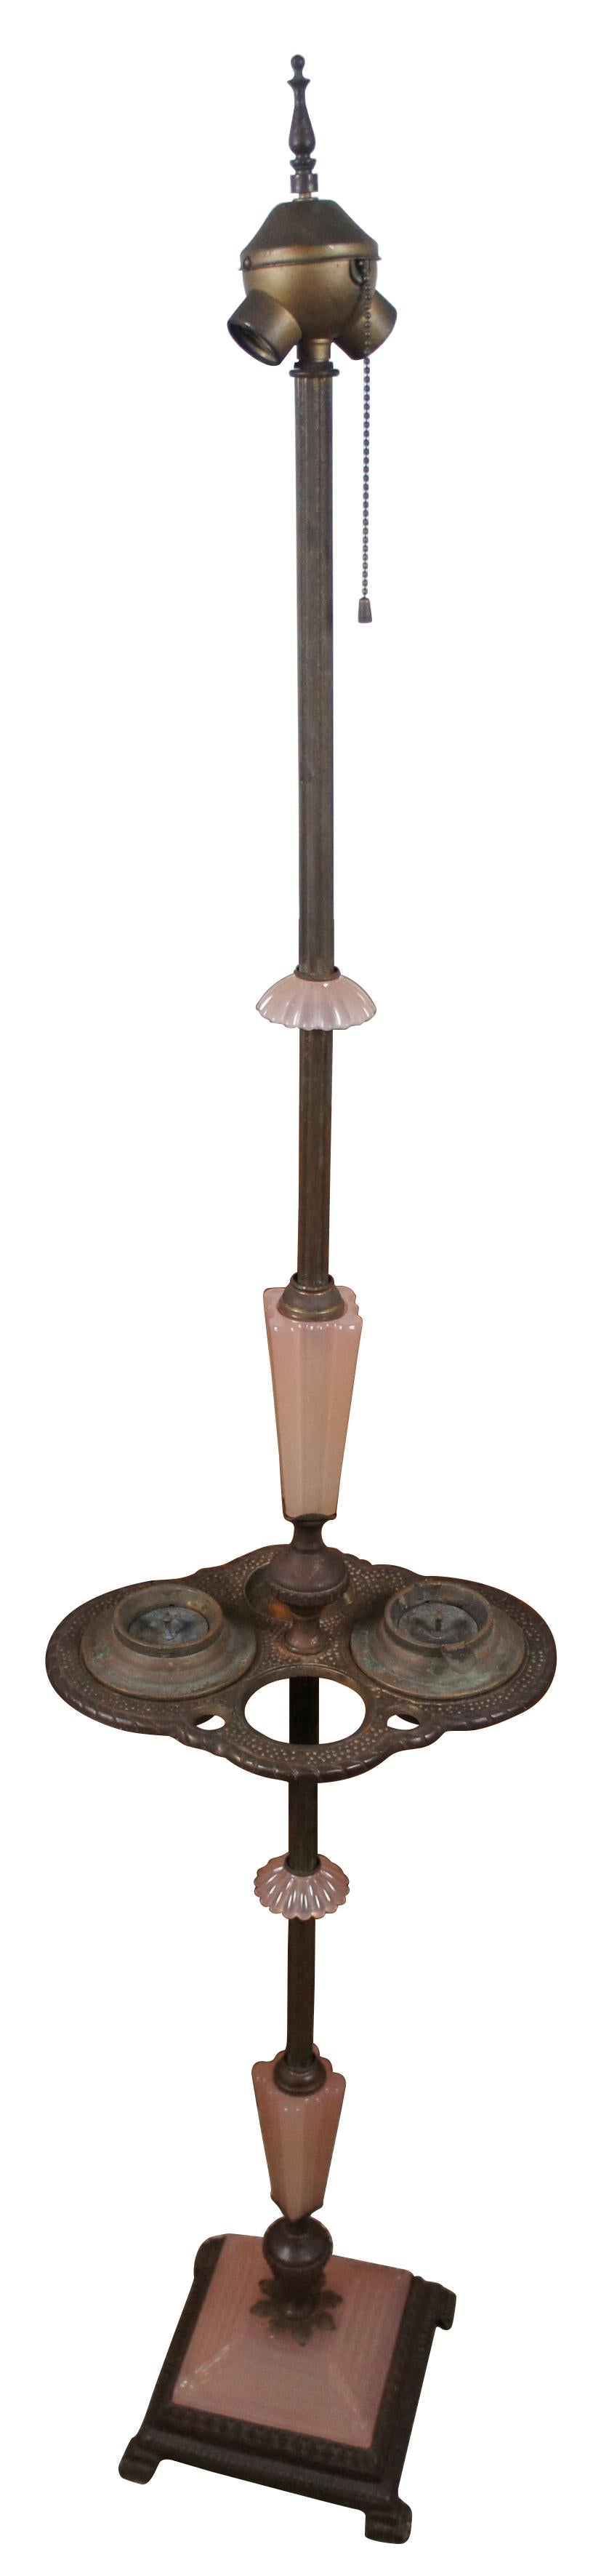 Antique Houze Glass Company pink glass and brass art deco style smoke stand / two light floor lamp; includes two ashtrays and missing the original match holder and lighter.

Measure: 12” x 9.25” x 61.75” / Base - 8.5” x 8.5” (Width x Depth x